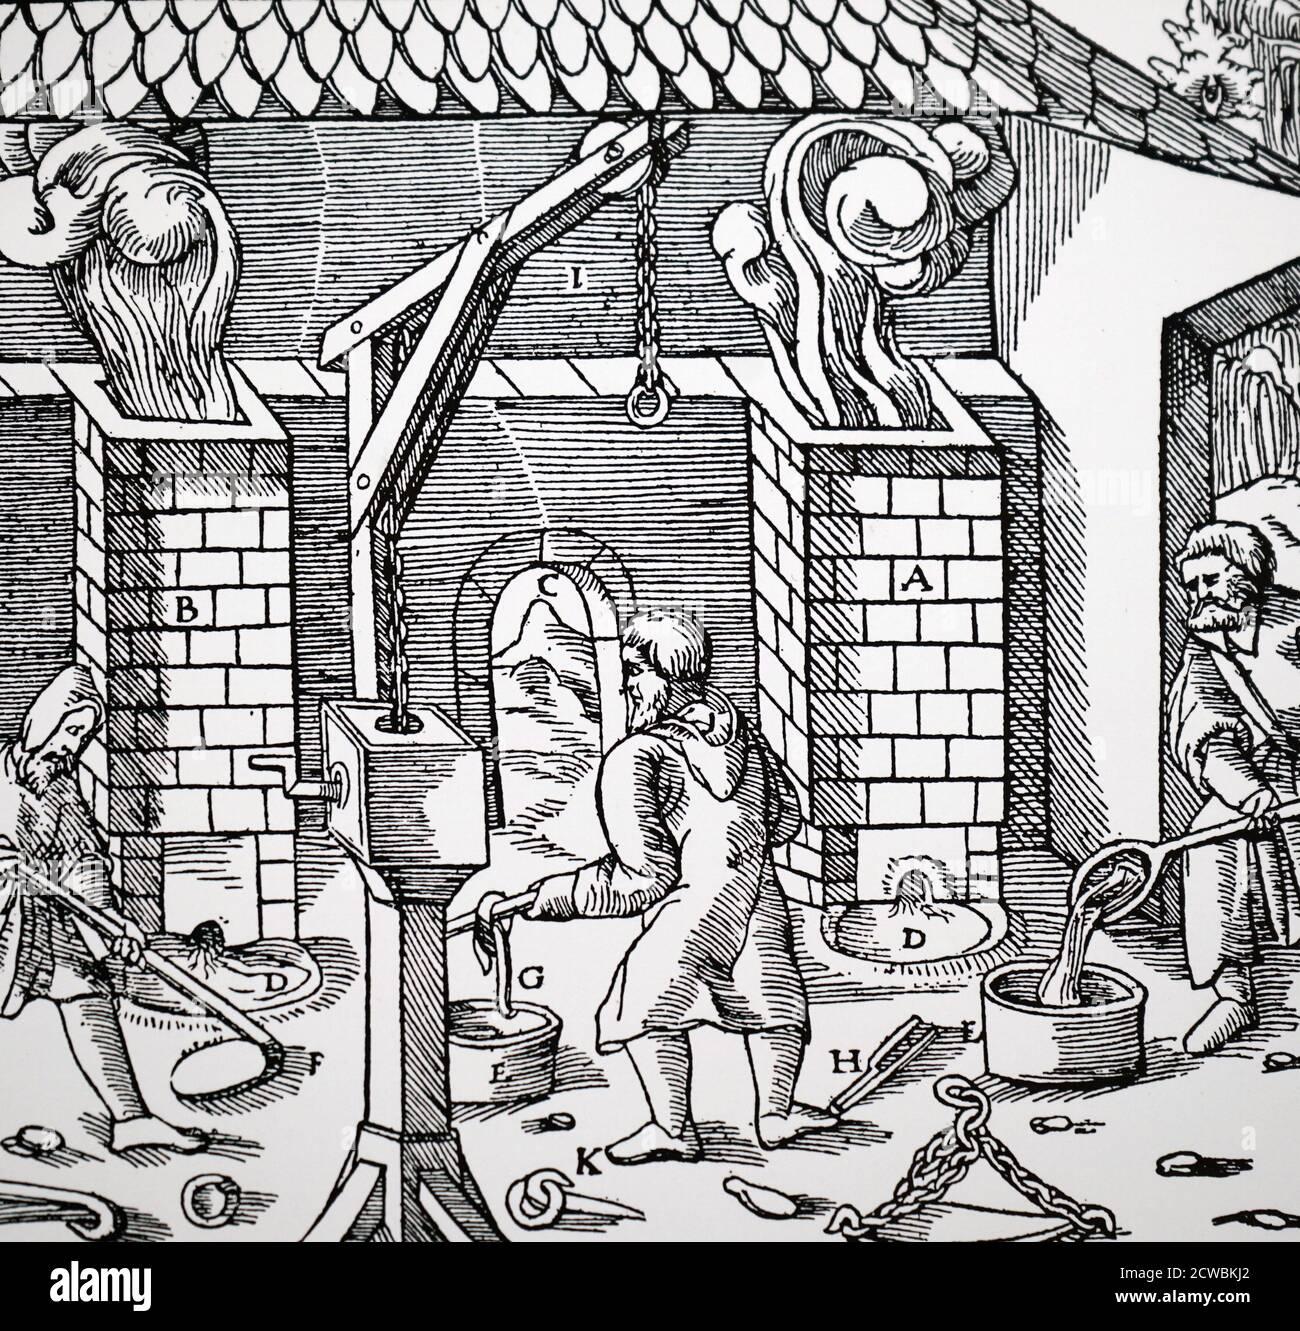 Woodcut engraving depicting a crane for lifting cakes of copper/lead alloy from moulds. Stock Photo